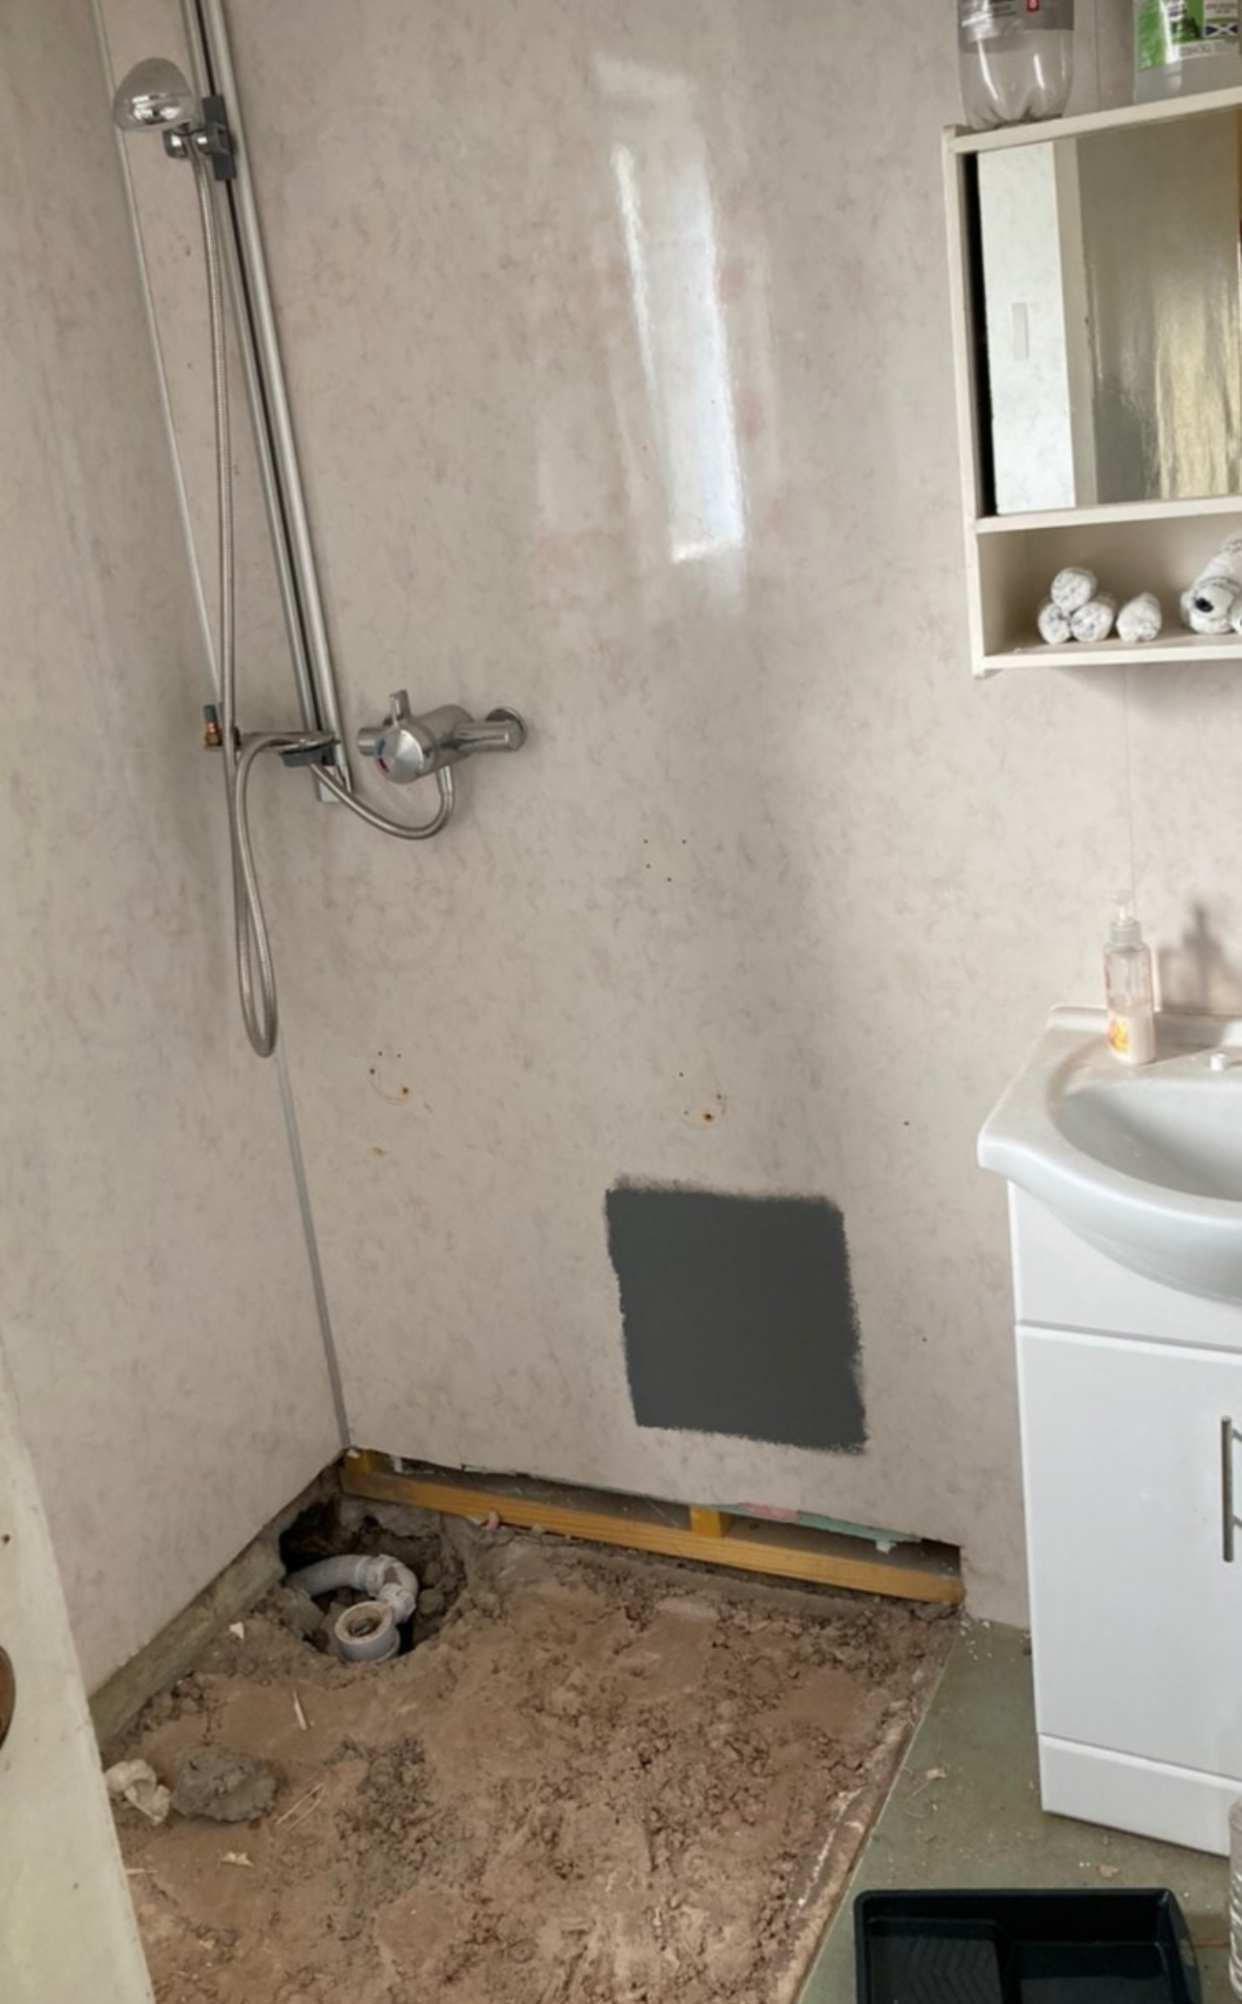 The bathroom before was dated and bland. (Latestdeals.co.uk)